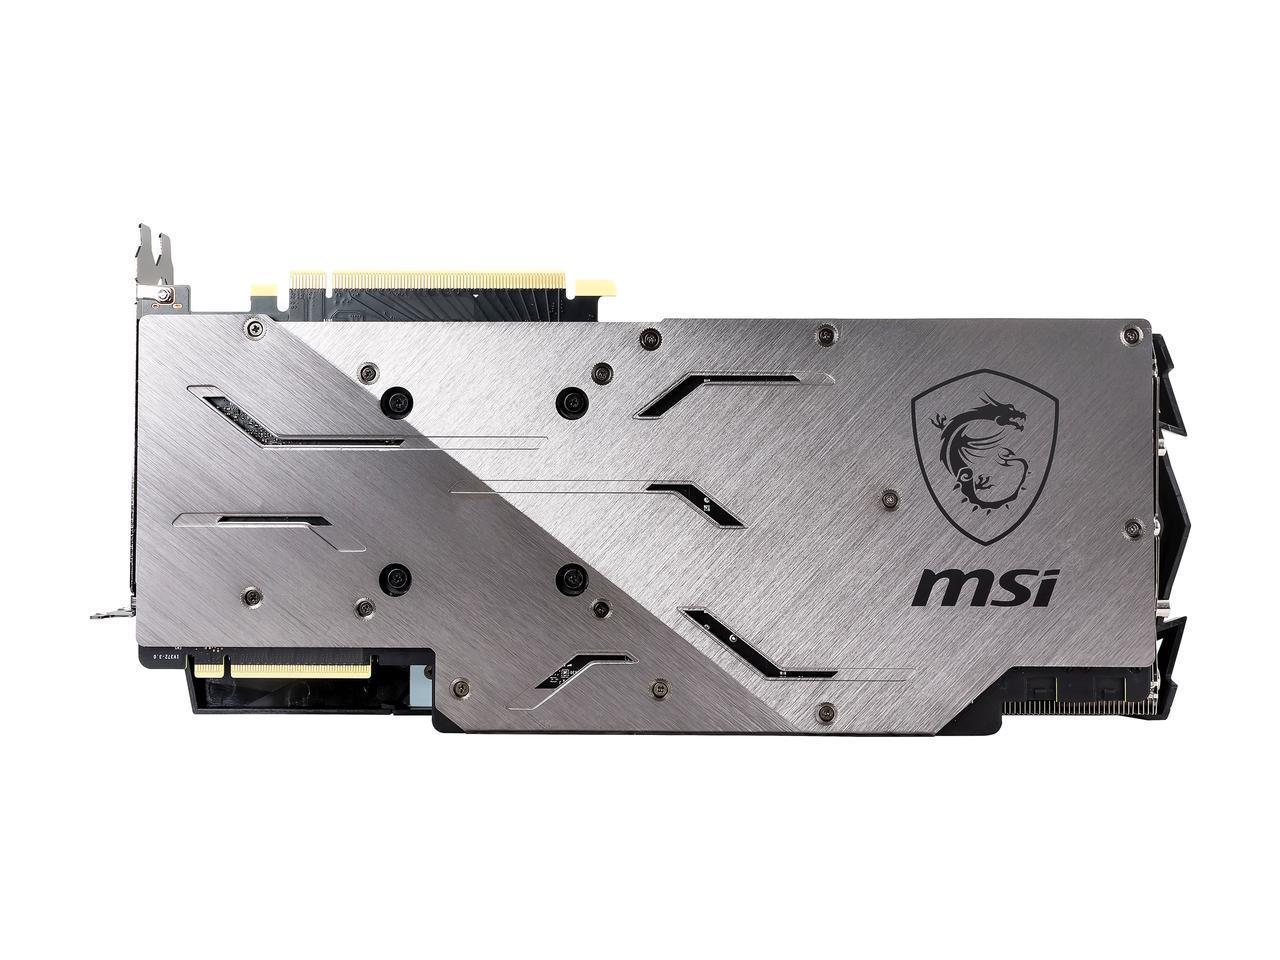 MSI GeForce RTX 2080 Gaming X Trio Graphics Card - image 3 of 3